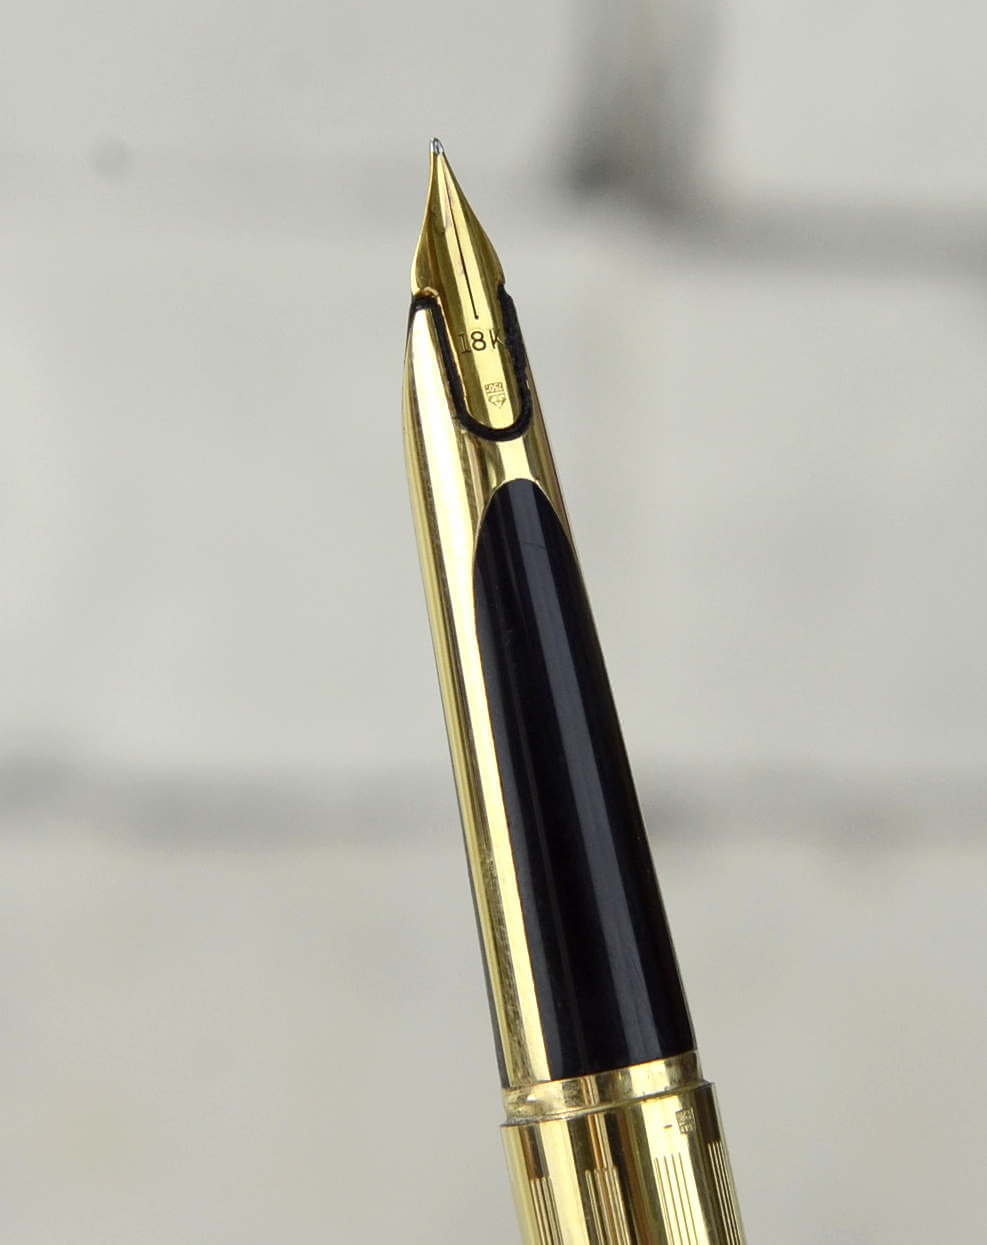 Waterman Flash Gray Fountain Pen 18k 750 Gold Nib Gold Trim Gold Plated Cap Made in France